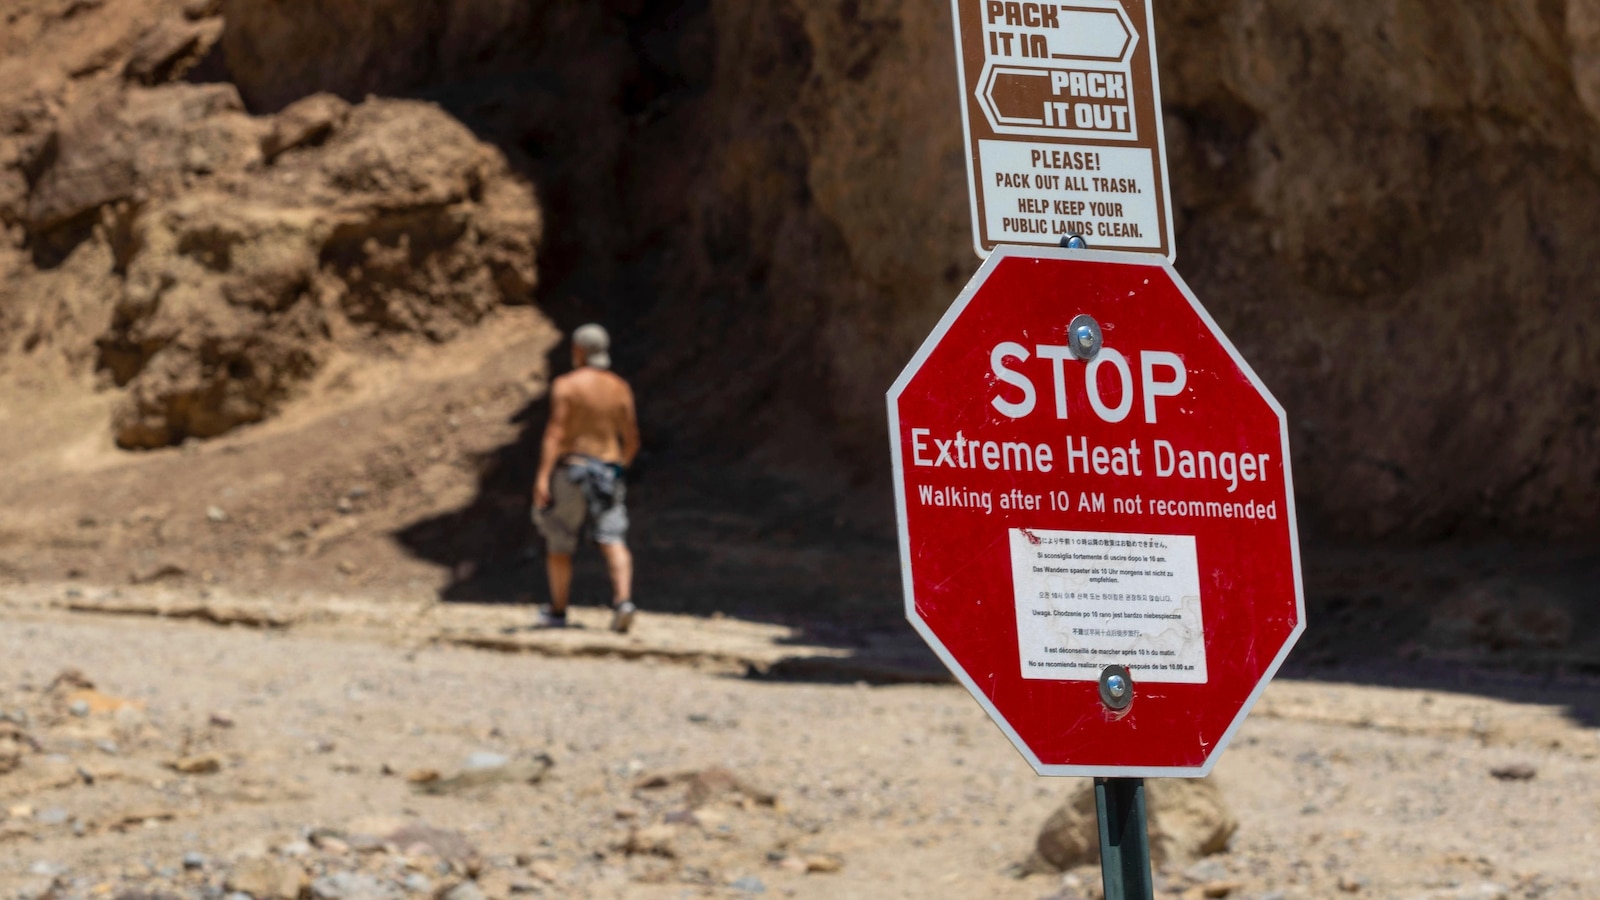 Southwest US to bake in first heat wave of season and records may fall